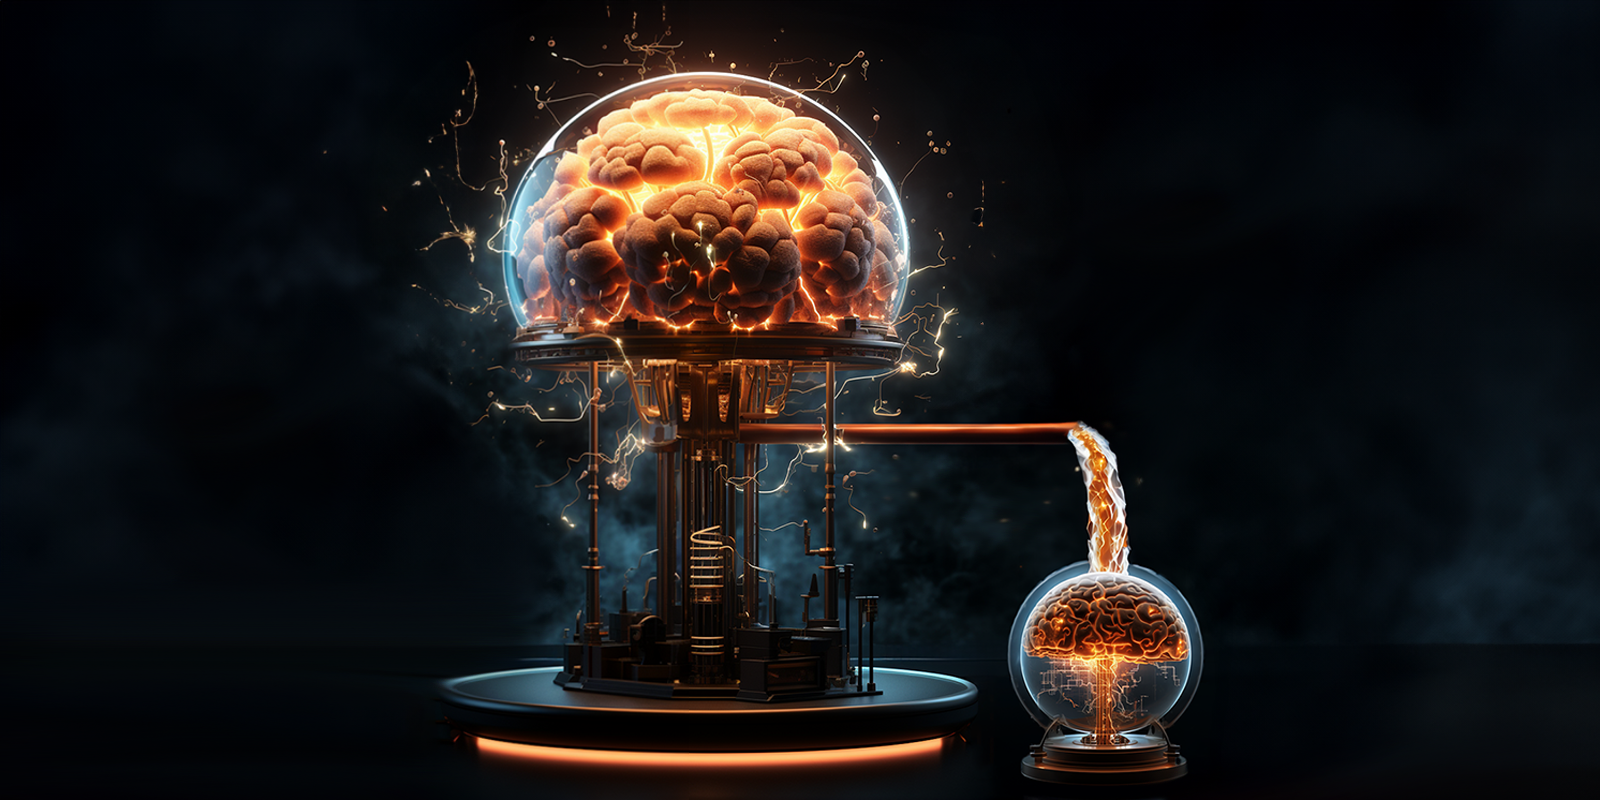 Mechanical brain exhibit with a fiery electric ambiance in a dark room, highlighting a large brain in a transparent sphere